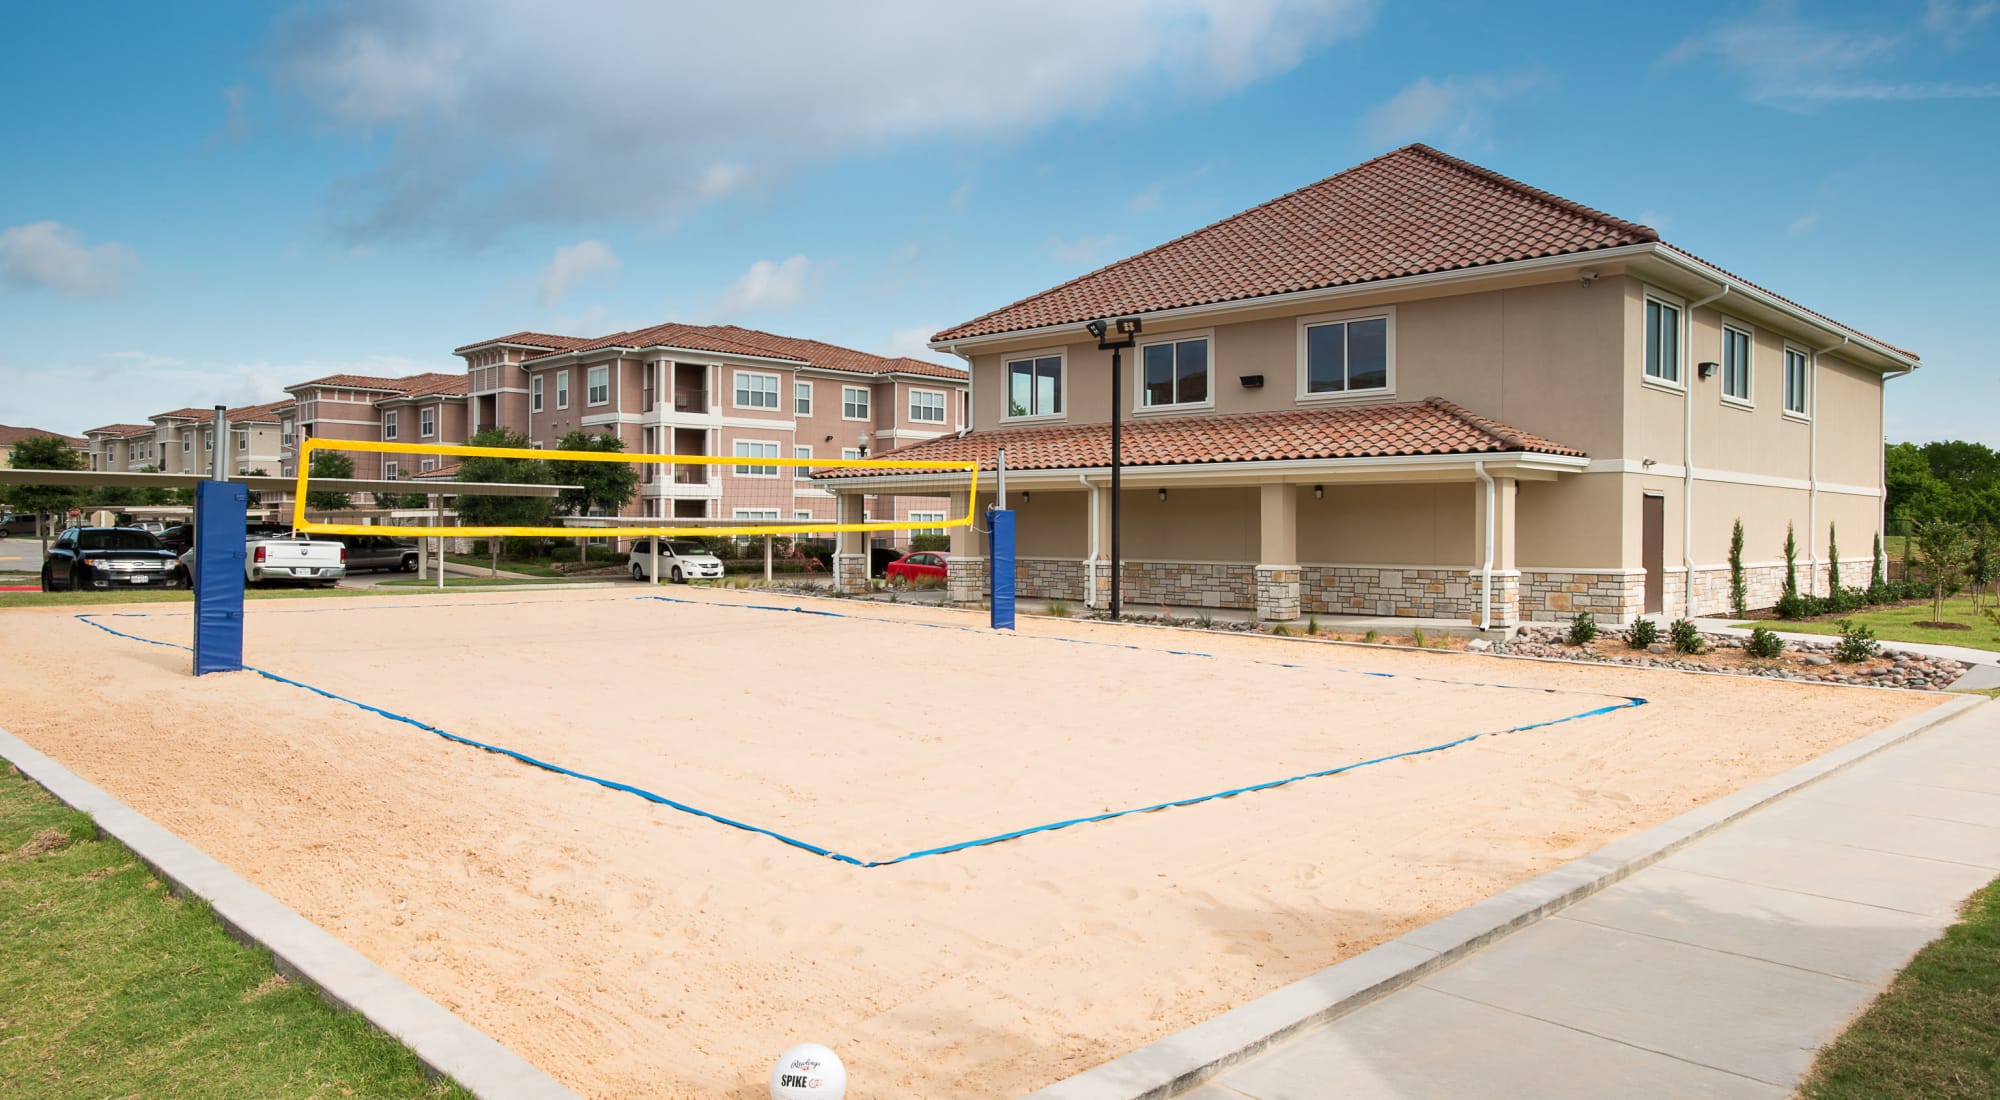 Sand volleyball court at Estancia at Ridgeview Ranch